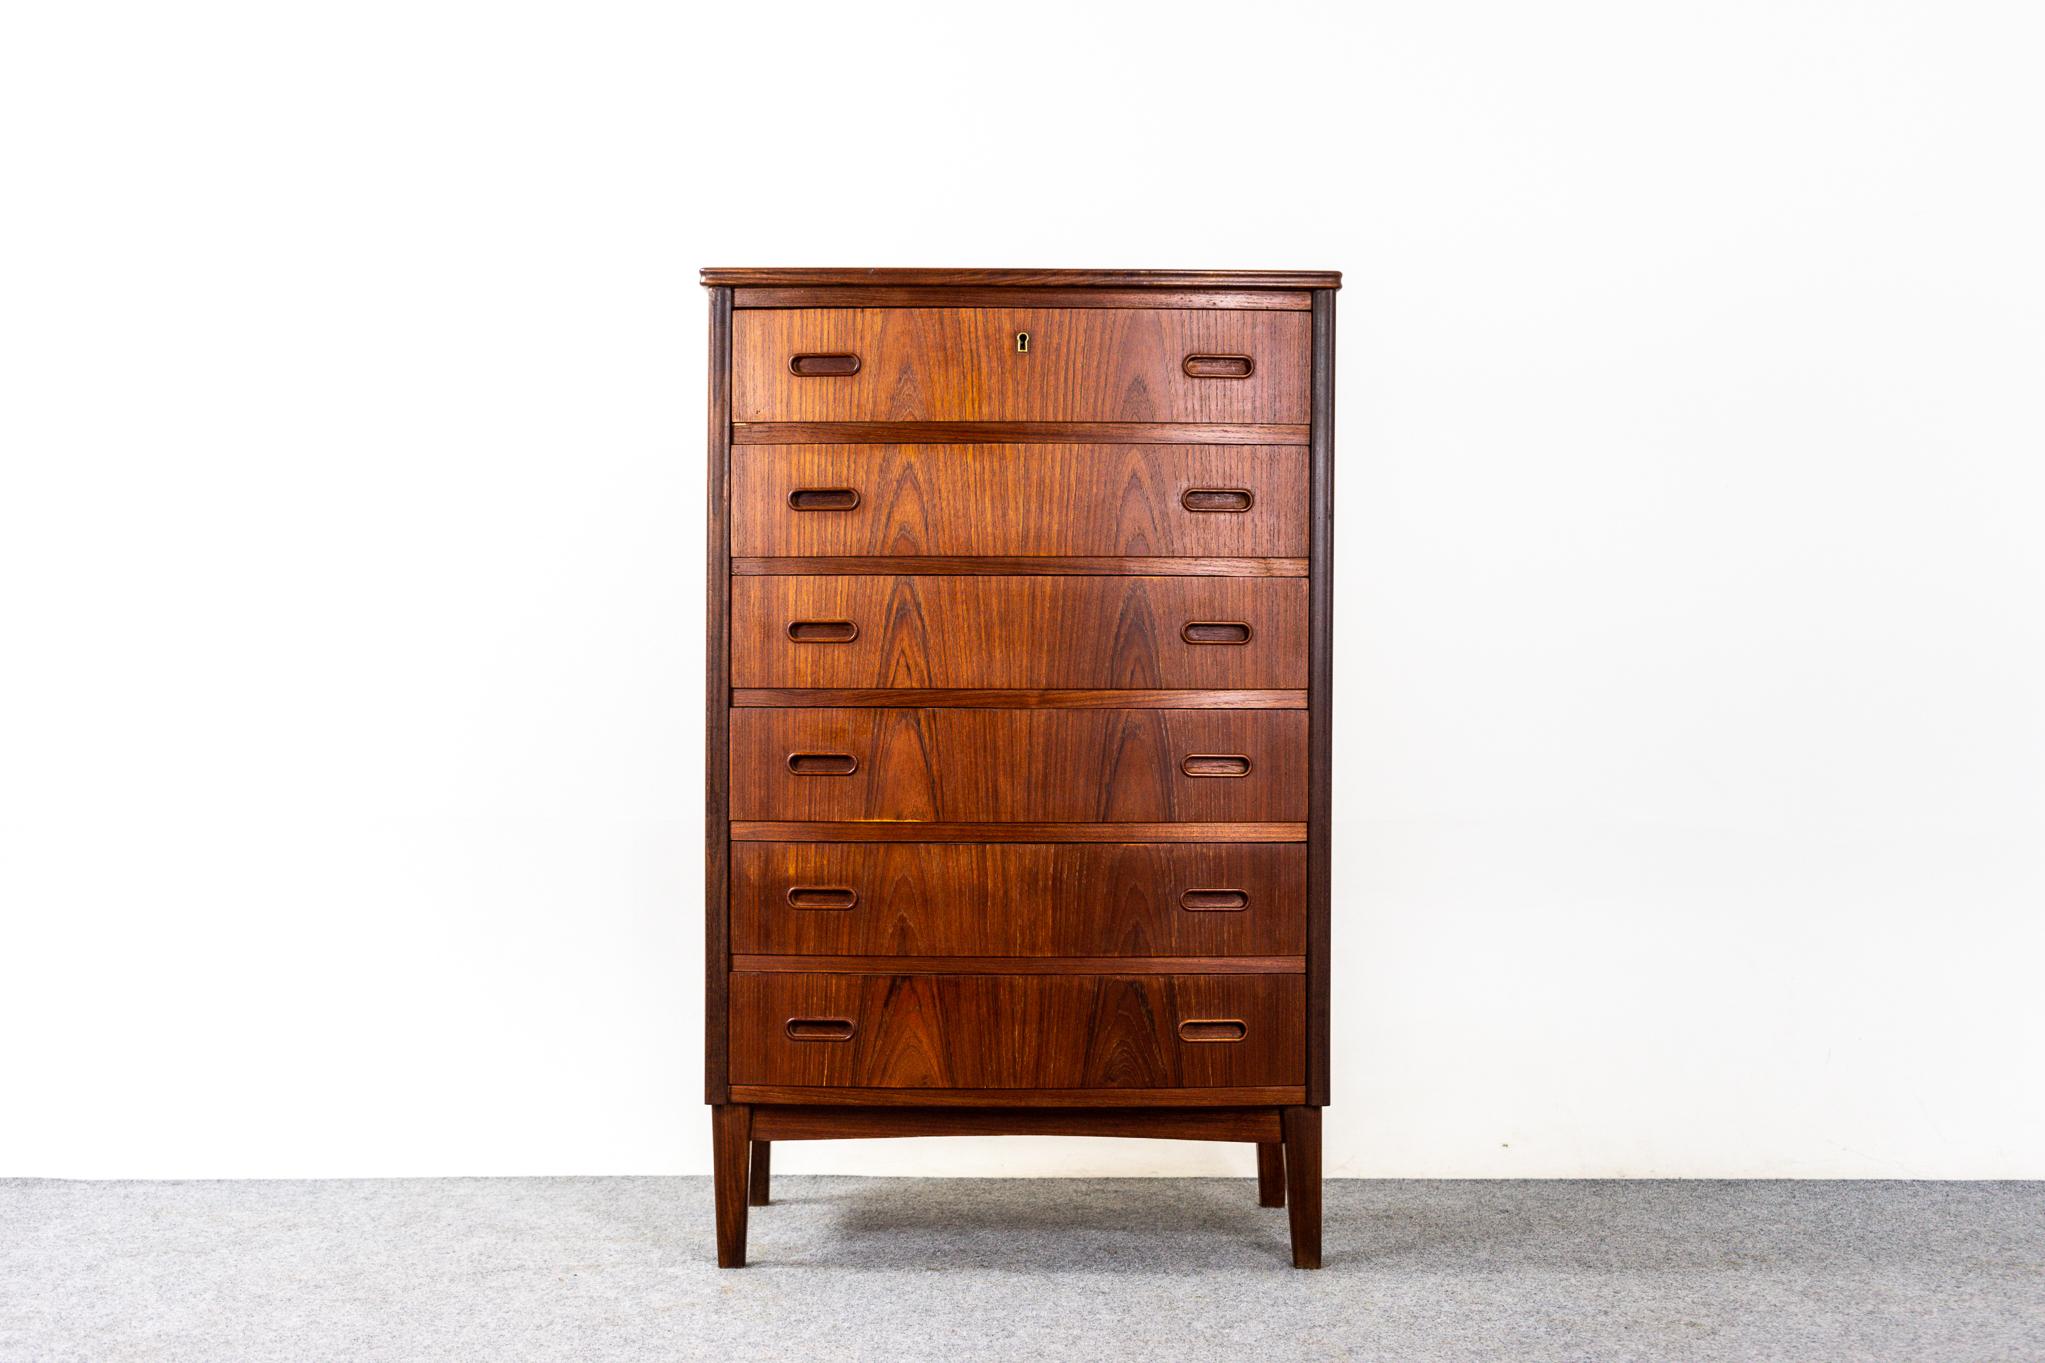 Teak dresser, circa 1960's. Six drawer dresser with solid wood edging with stunning book-matched veneer on all drawer faces and dovetail construction. Bow front design is subtle and elegant, solid wood, removable legs too.

Unrestored item, some